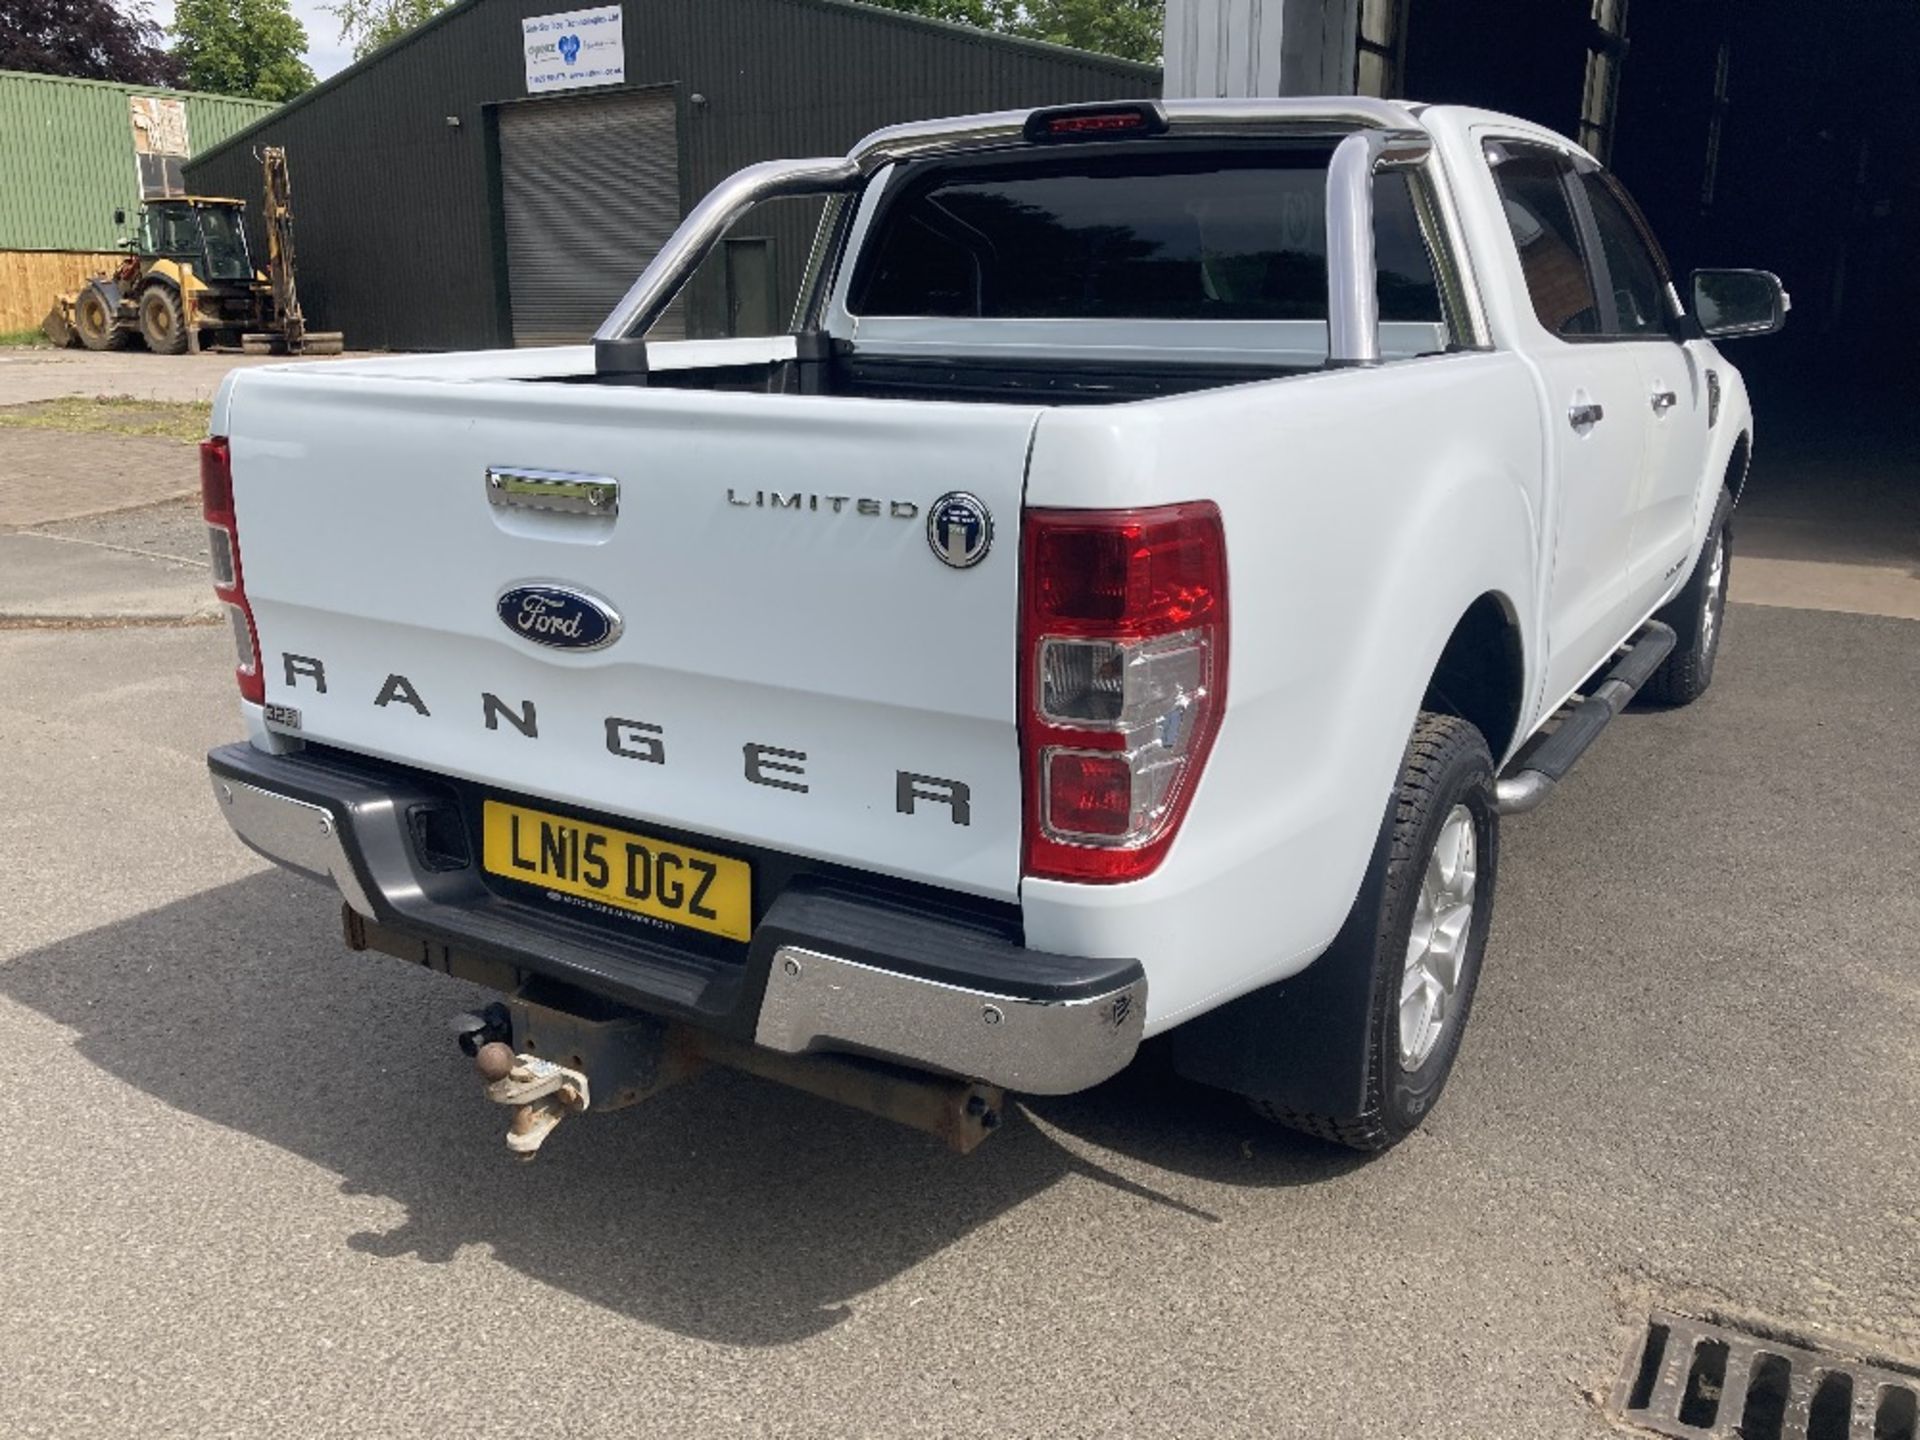 Ford Ranger Limited 3.2TDCI Double Cab Pick Up - Image 6 of 10